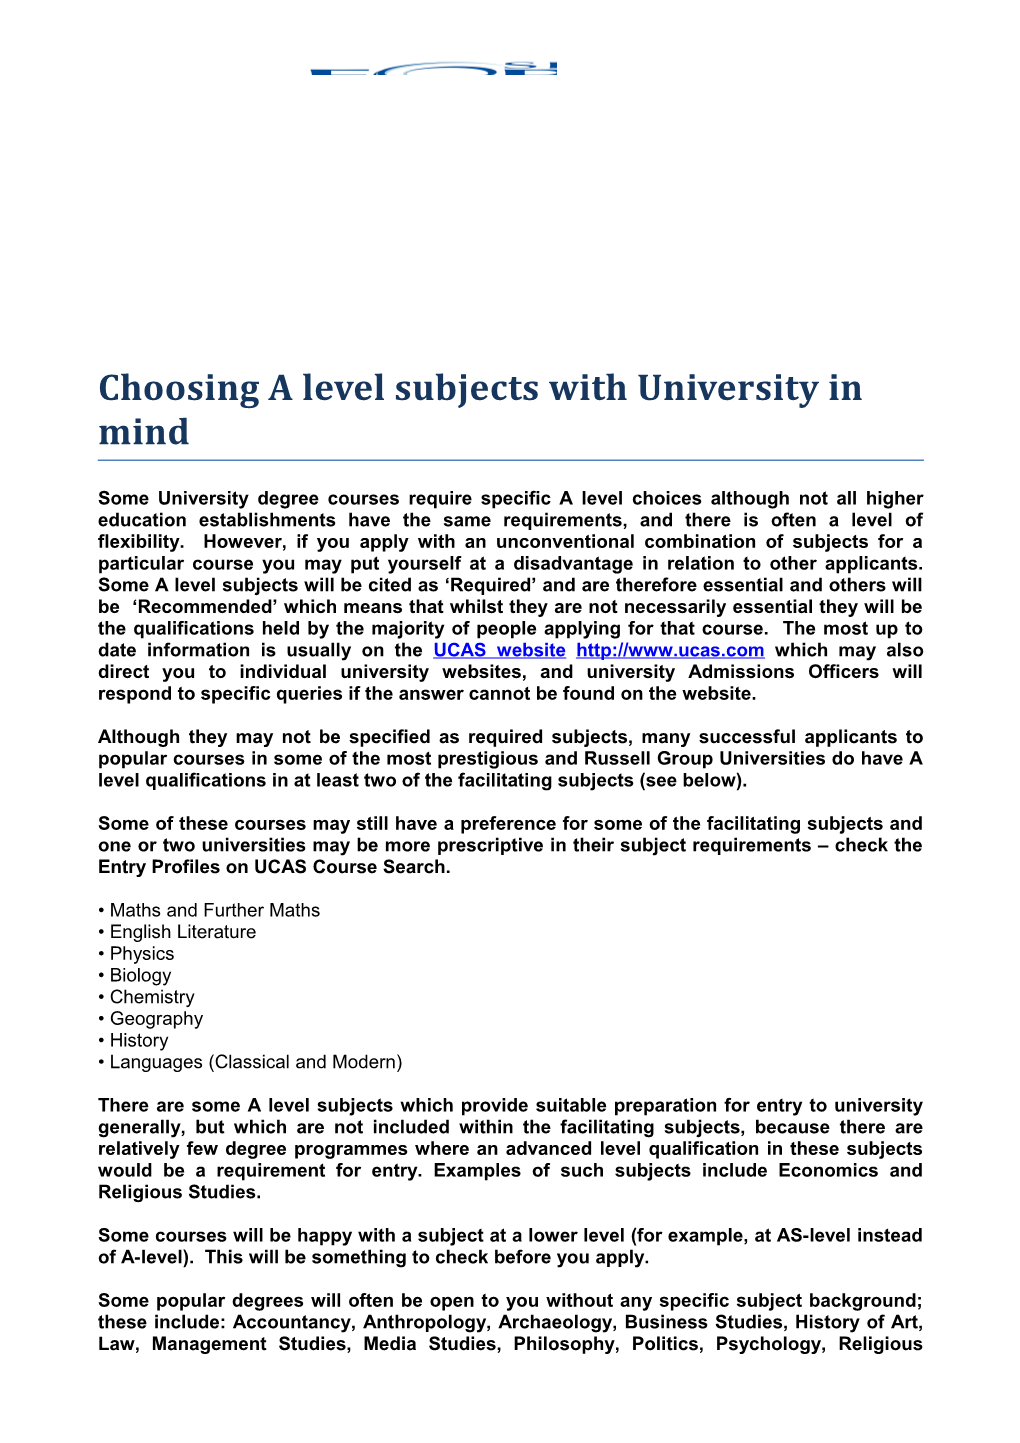 Choosing a Levelsubjects with University in Mind